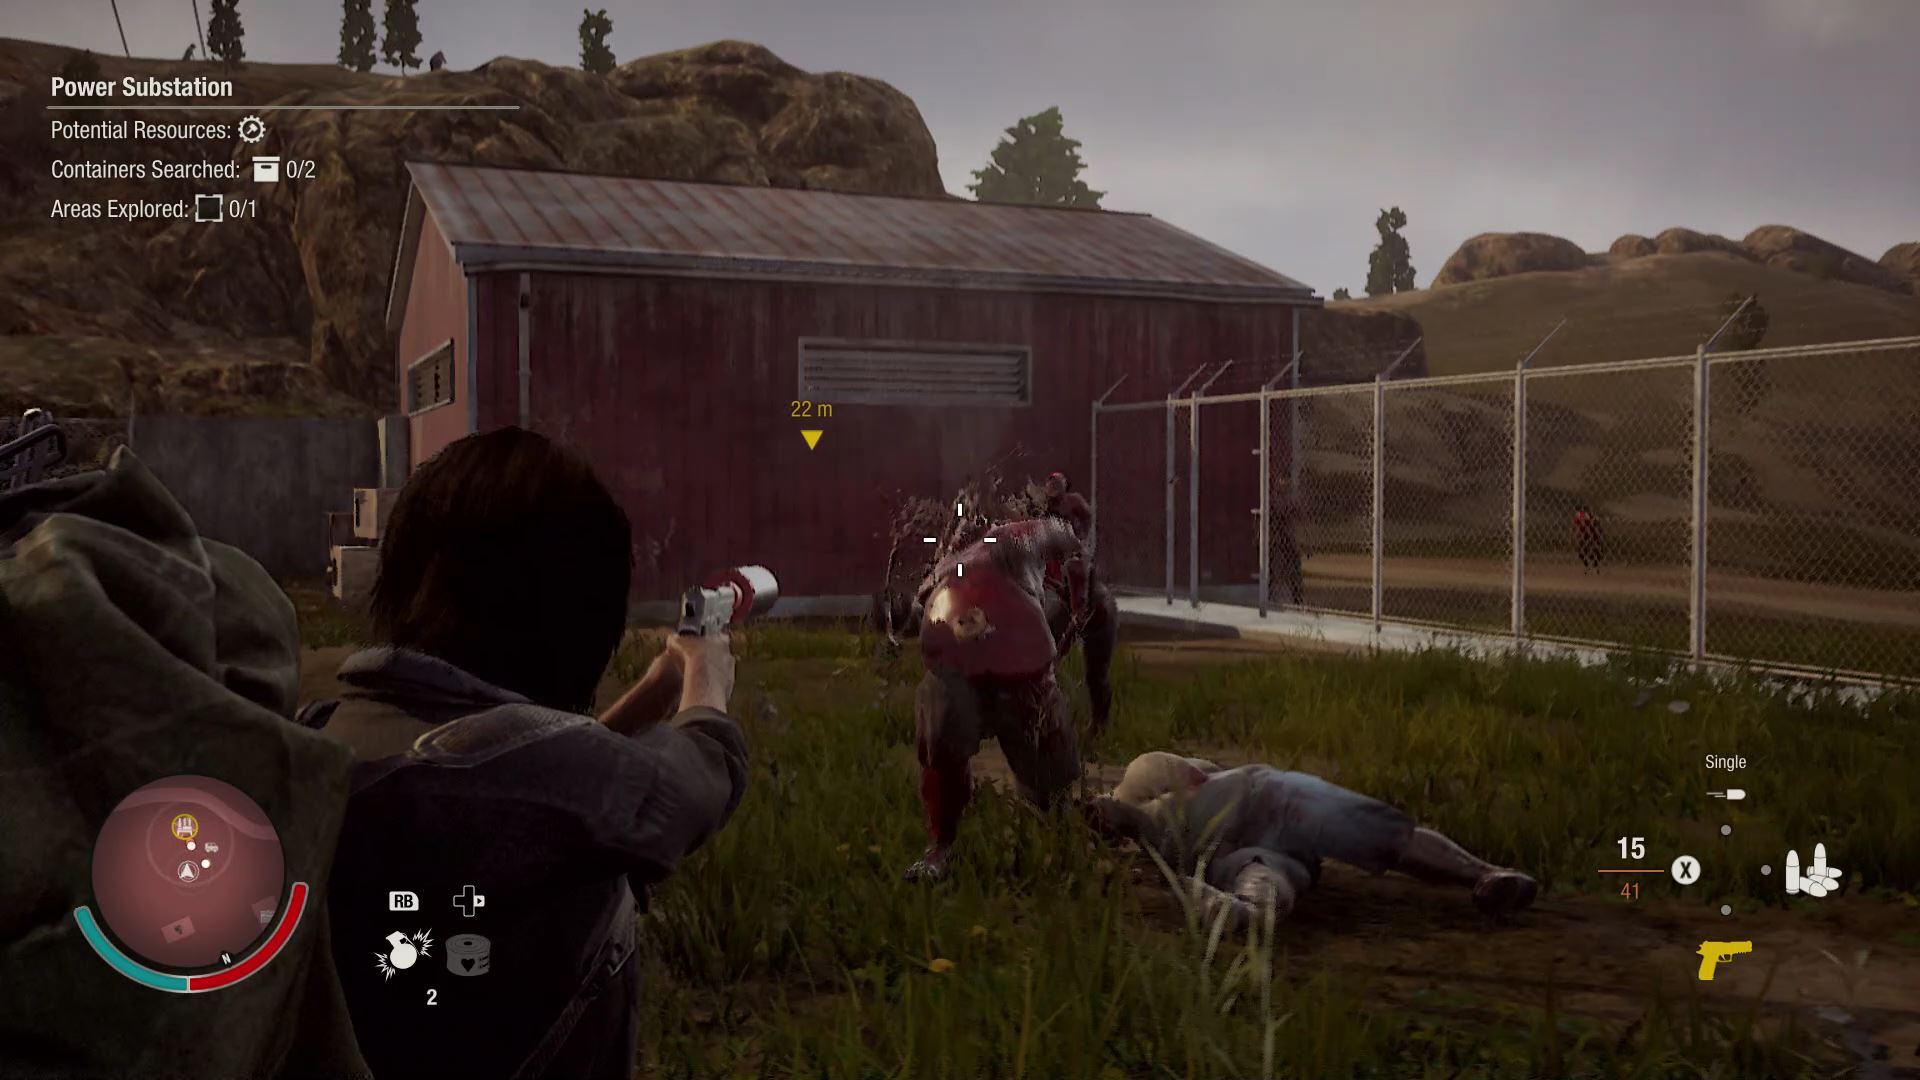 State of Decay 2 PS4, Skills, Traits, Gameplay, Multiplayer, Mods